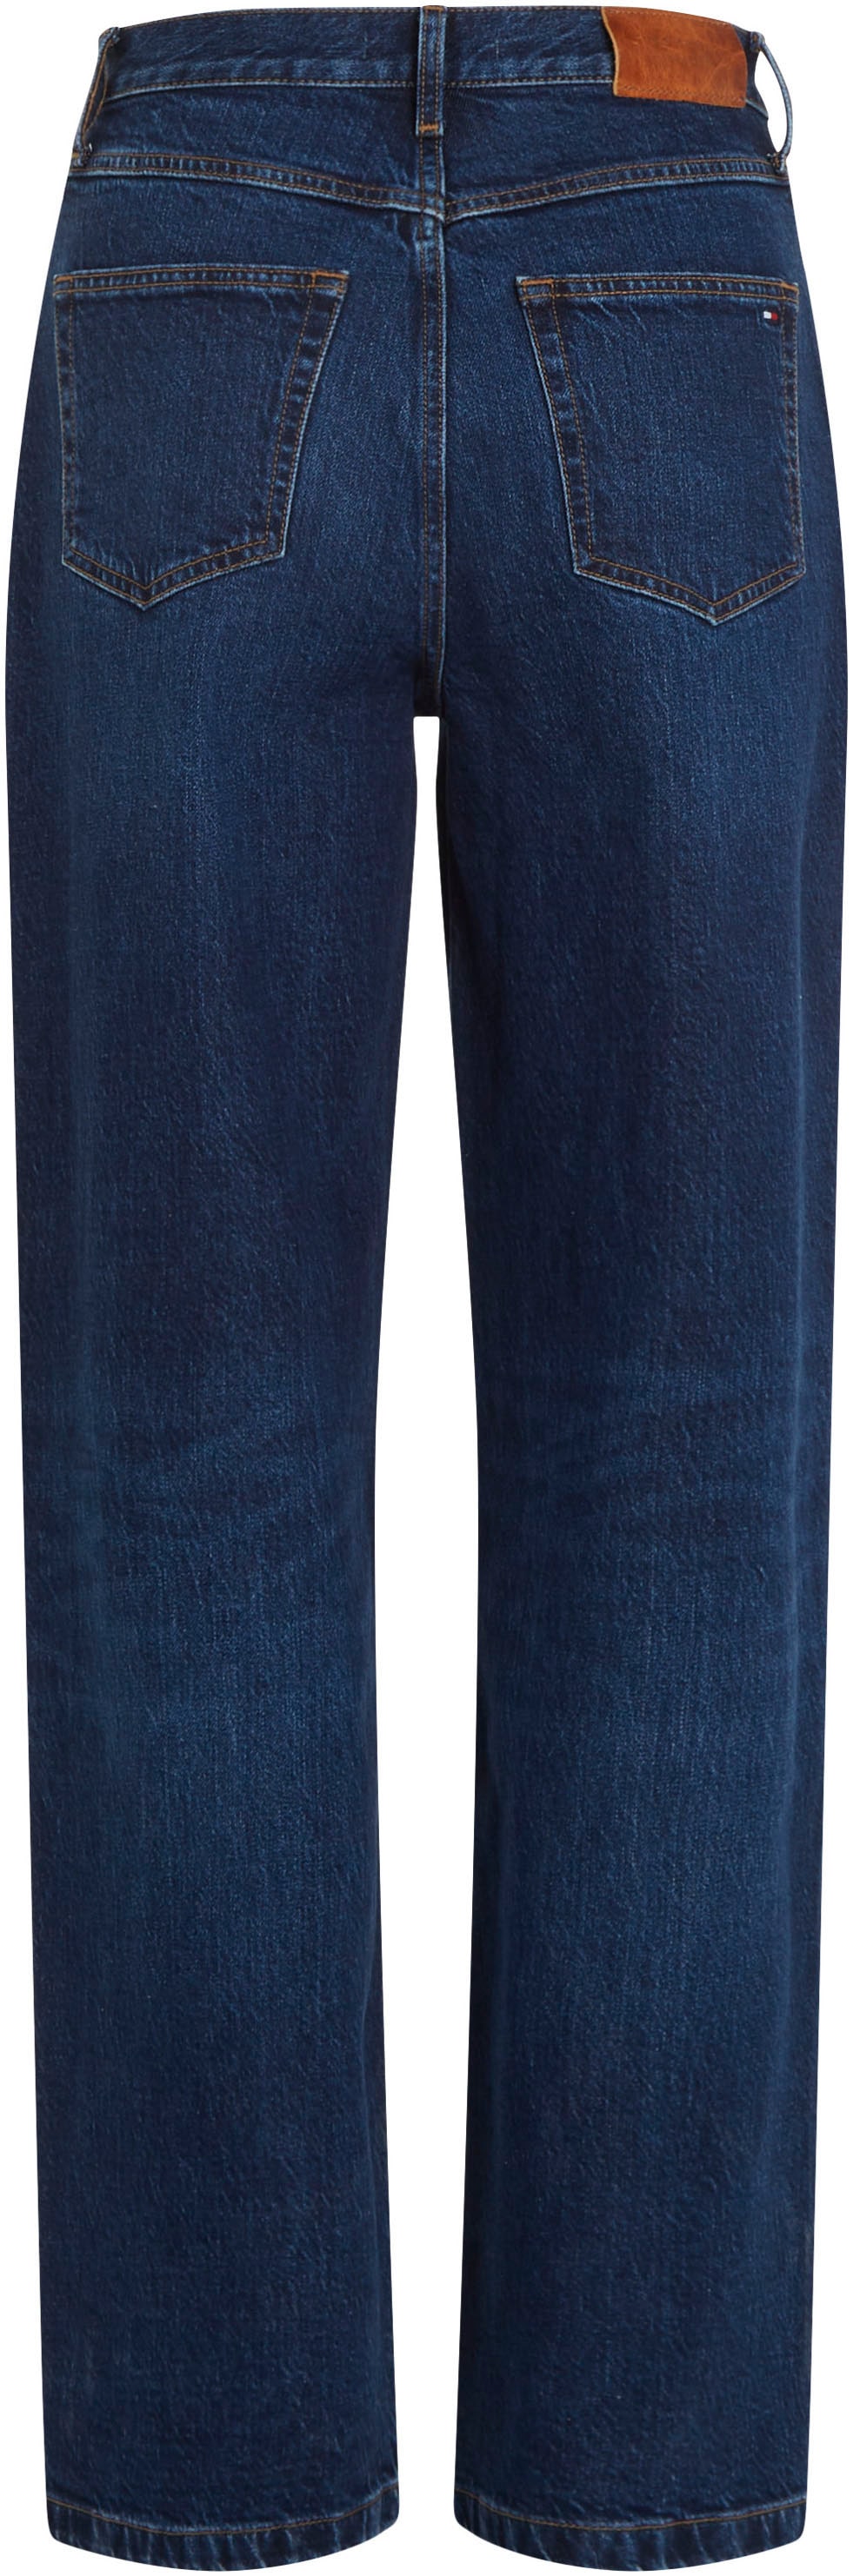 Tommy Hilfiger PAM«, »RELAXED Relax-fit-Jeans kaufen Waschung weißer online HW STRAIGHT in